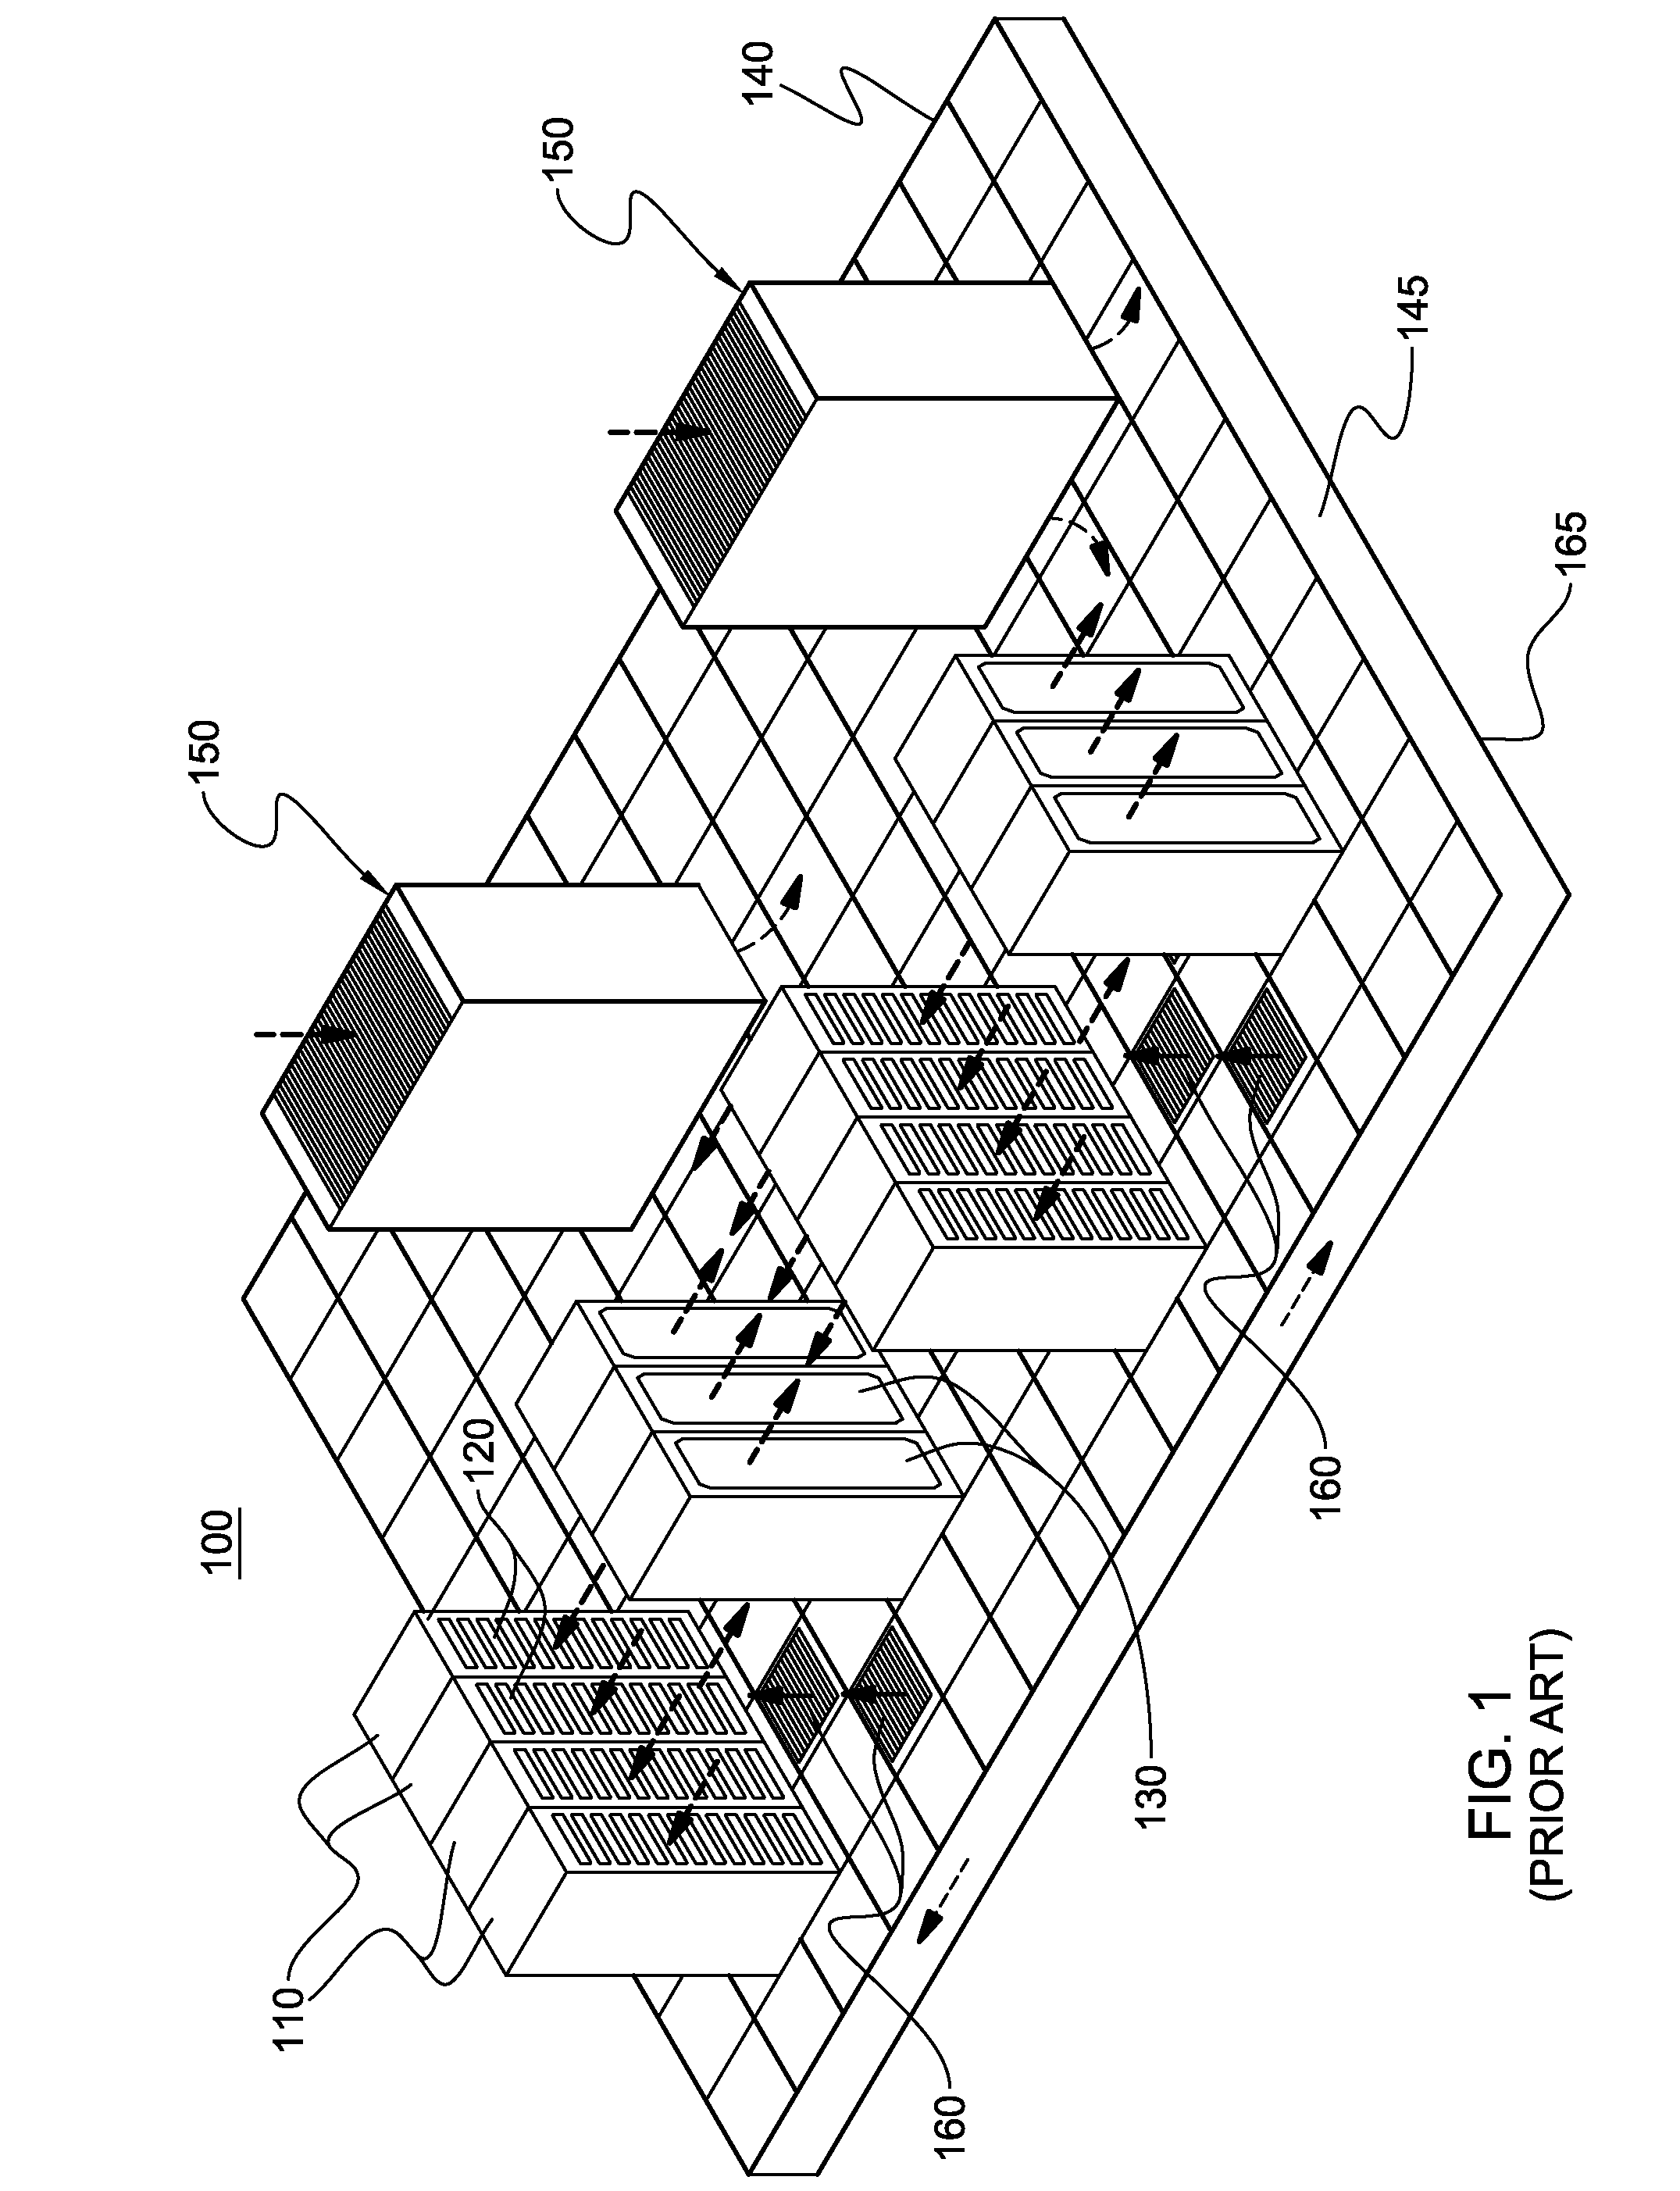 Liquid-cooled electronics apparatus and methods of fabrication